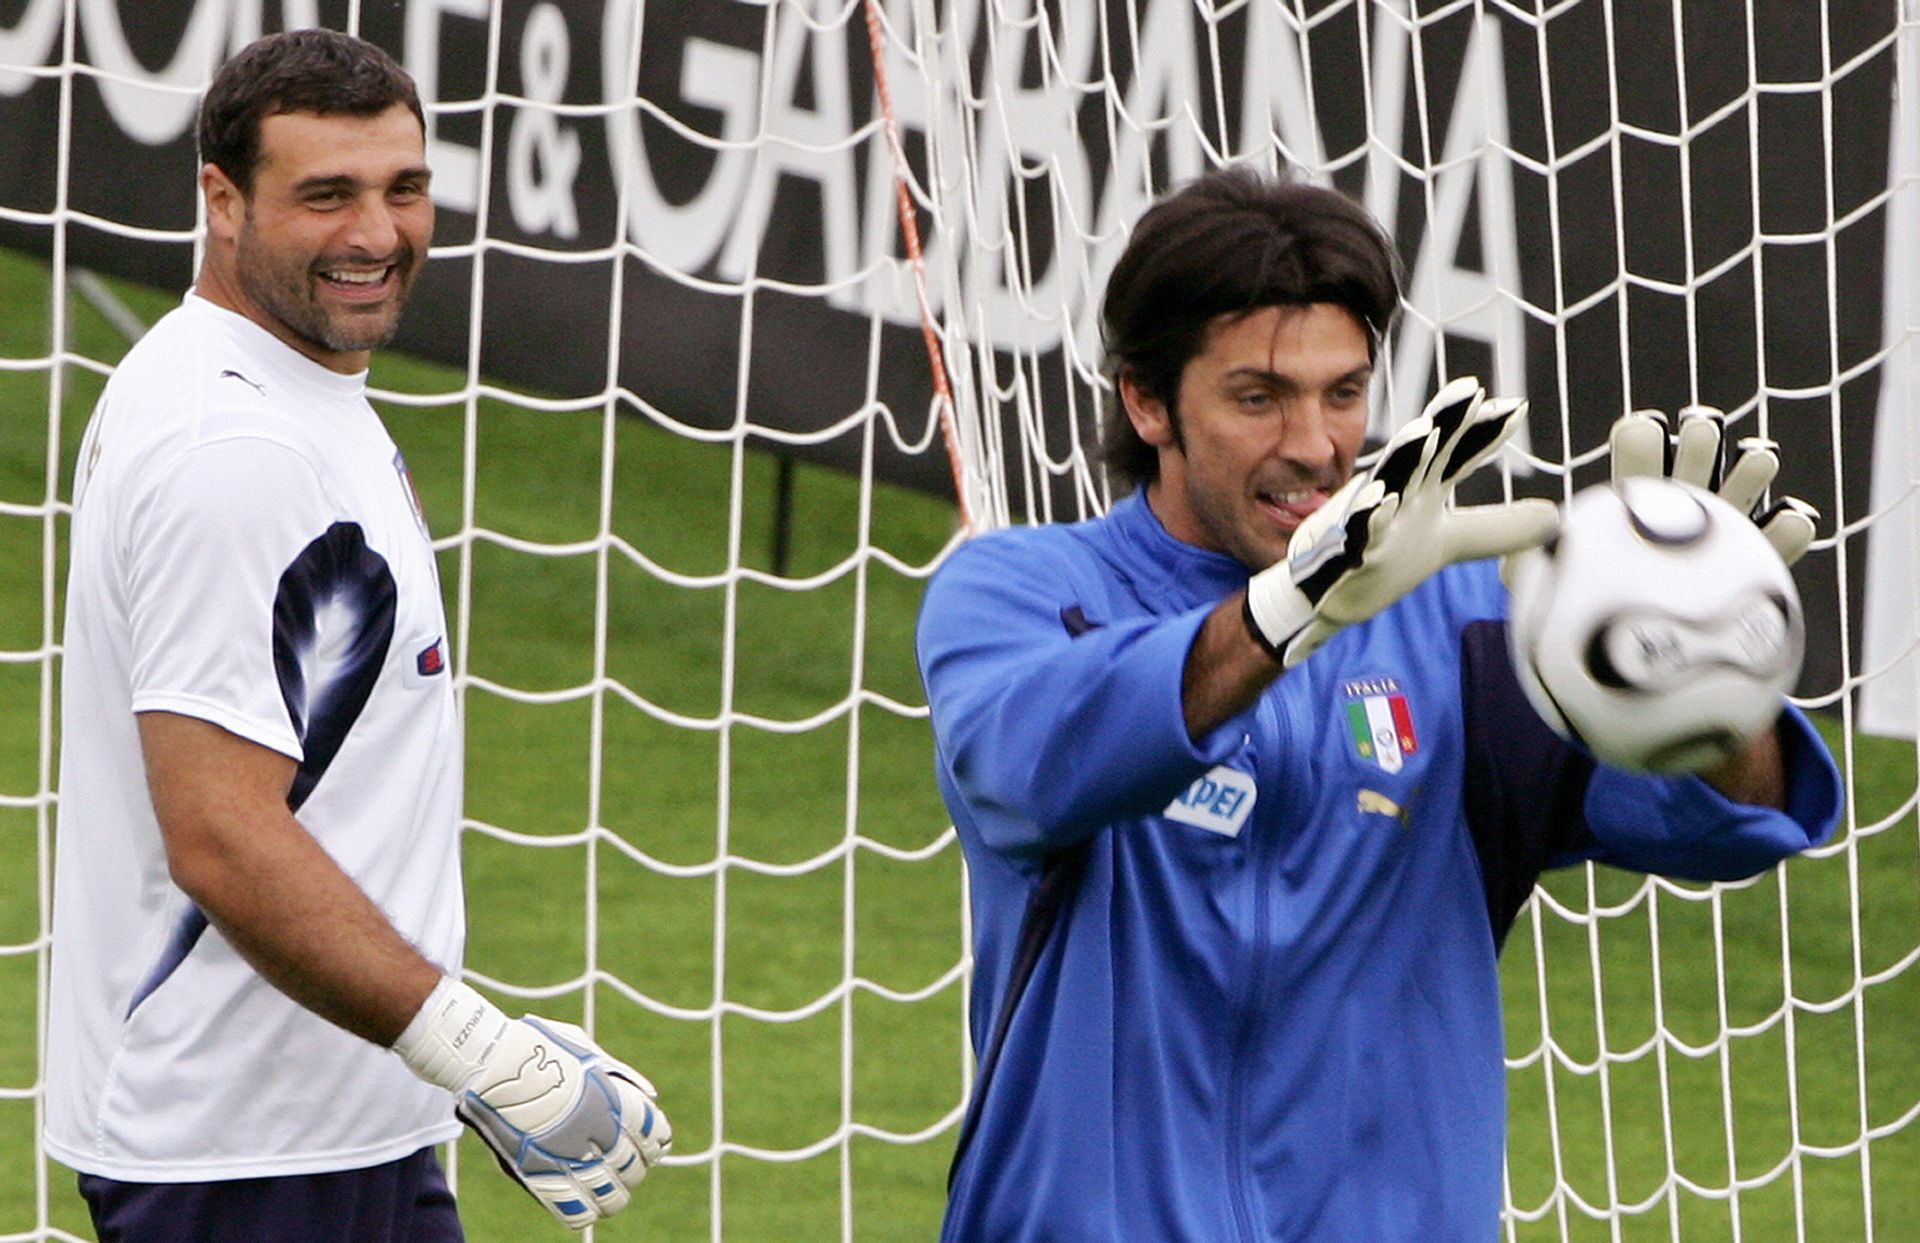 <p>                     Angelo Peruzzi only made nine appearances for Italy in the 2000s, but finished his international career with a World Cup winners' medal in 2006.                   </p>                                      <p>                     After a sole season at Inter, Peruzzi played at Lazio between 2000 and 2007 and was still one of the finest goalkeepers in Serie A. At the World Cup in Germany, he was back-up to Gianluigi Buffon.                   </p>